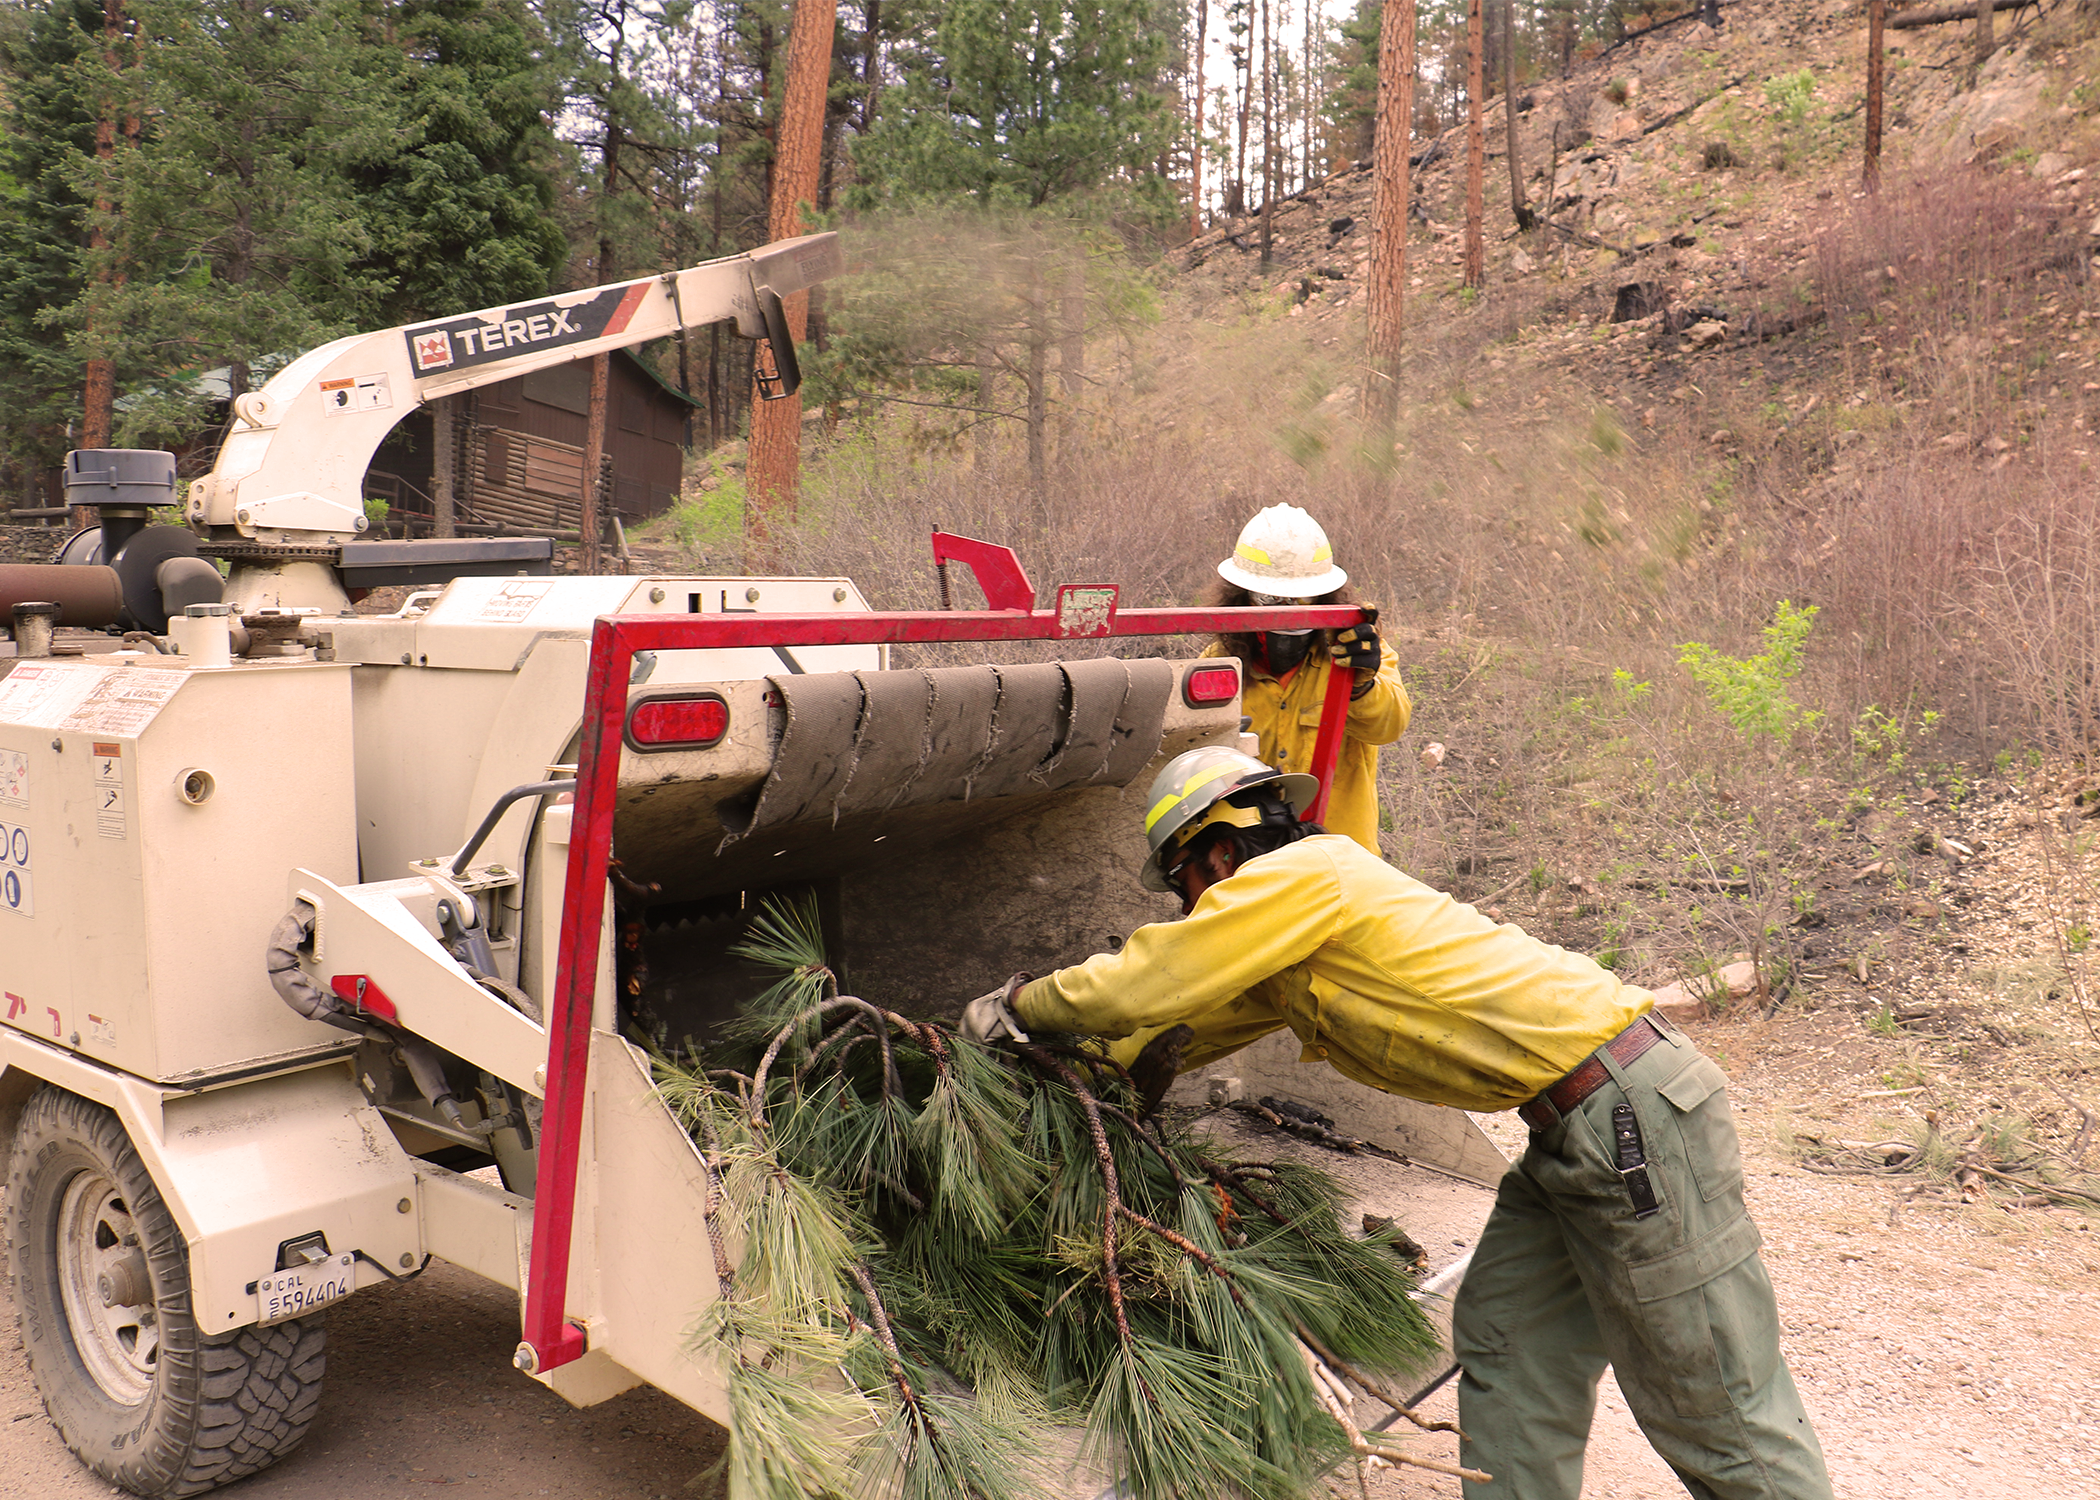 A firefighter places tree branches into a machine pulled behind a vehicle.  The branches are chipped and shoot out an arm on the machine.  The small woodchips move past a firefighter and onto the ground with a house in the background.